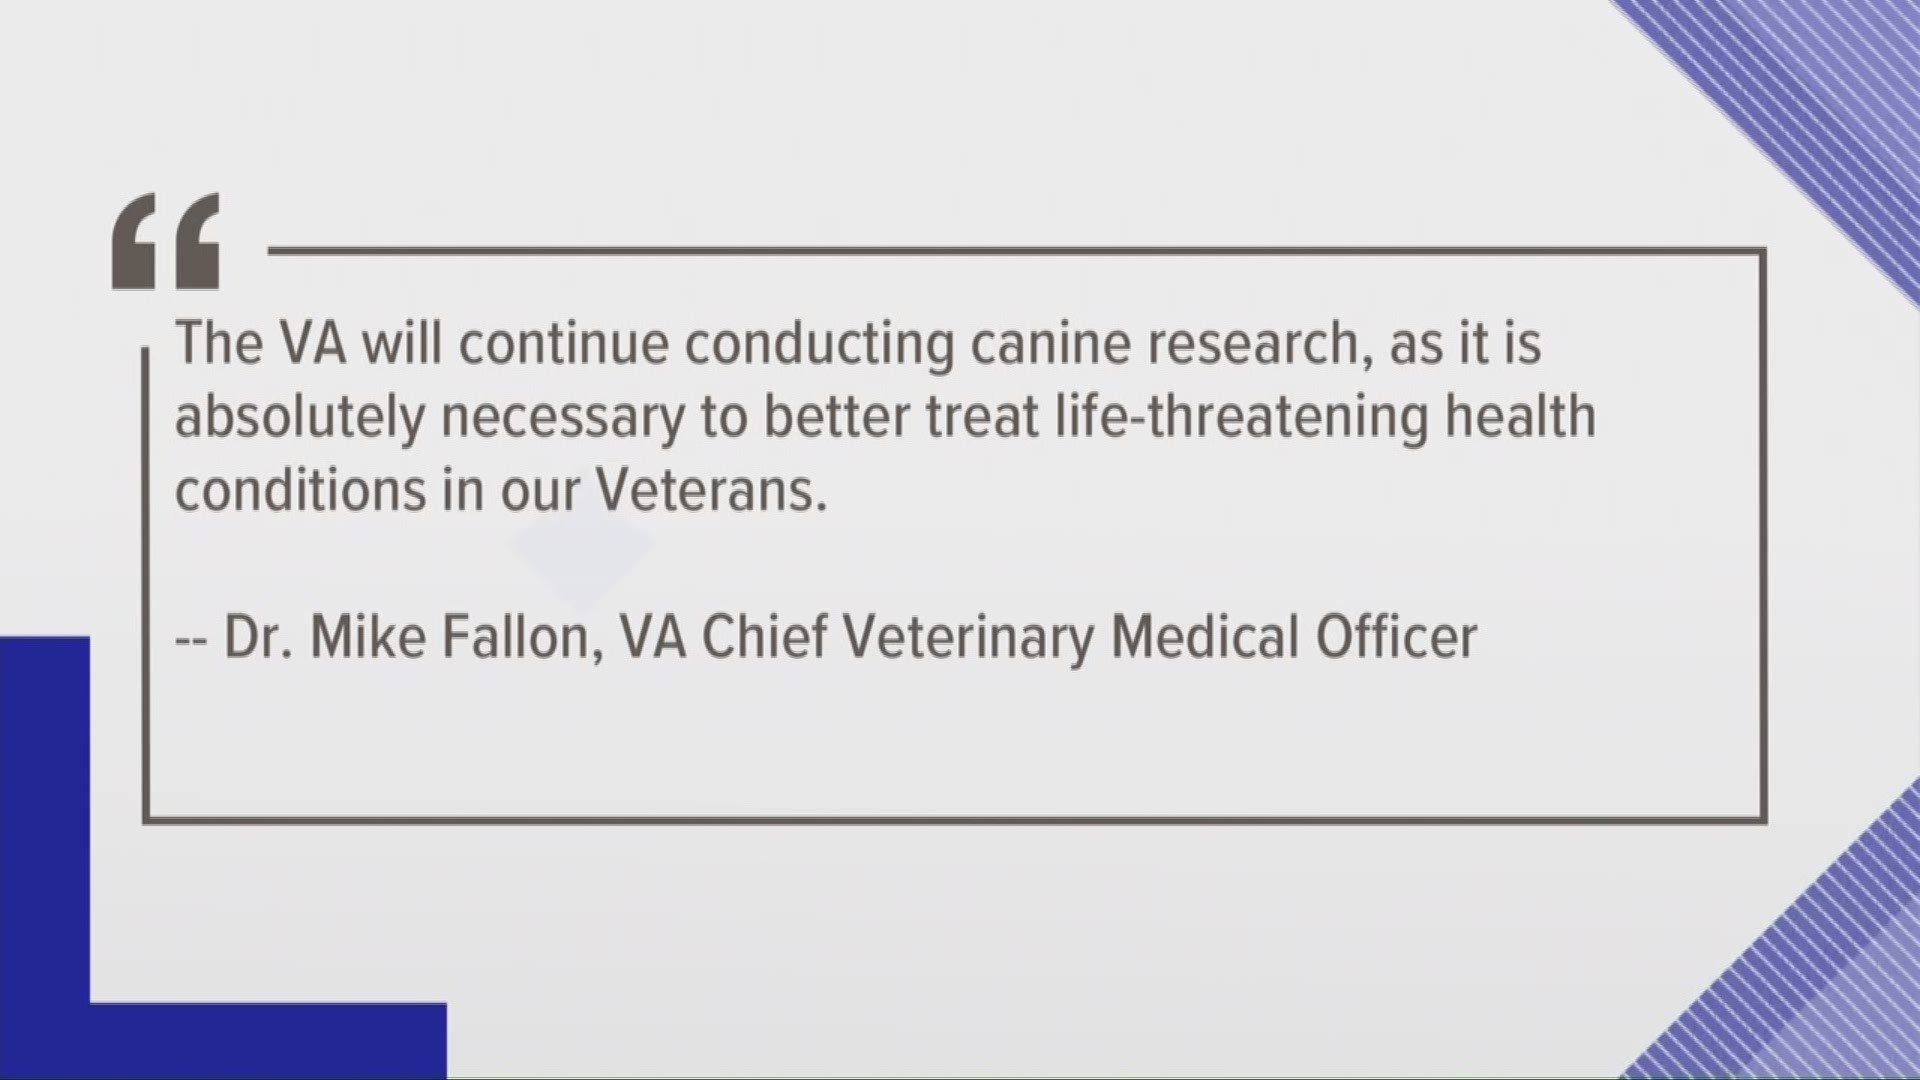 Activists to protest Cleveland VA Medical Center using dogs for research